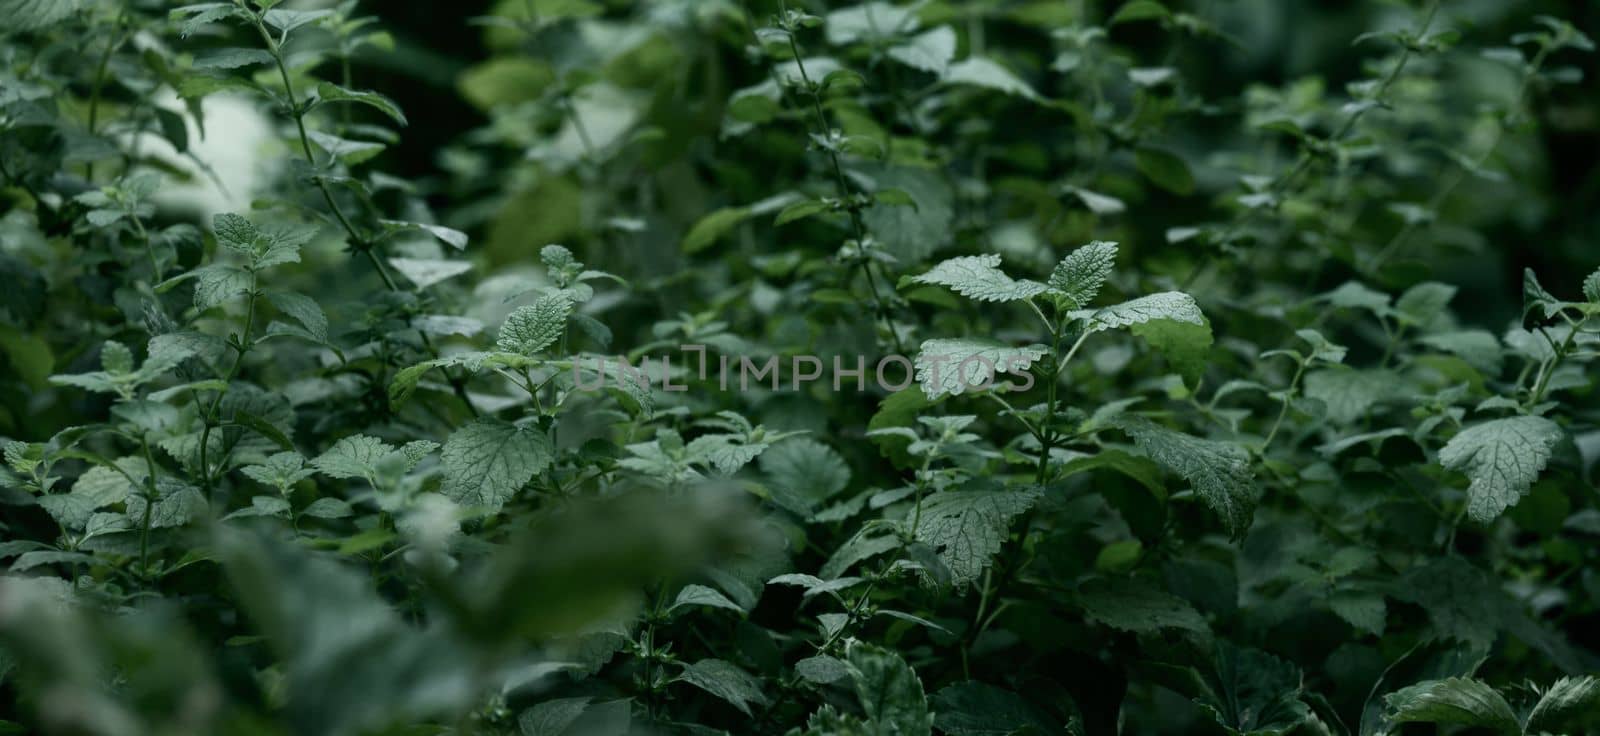 Growing mint bushes in the garden on a summer day by ndanko